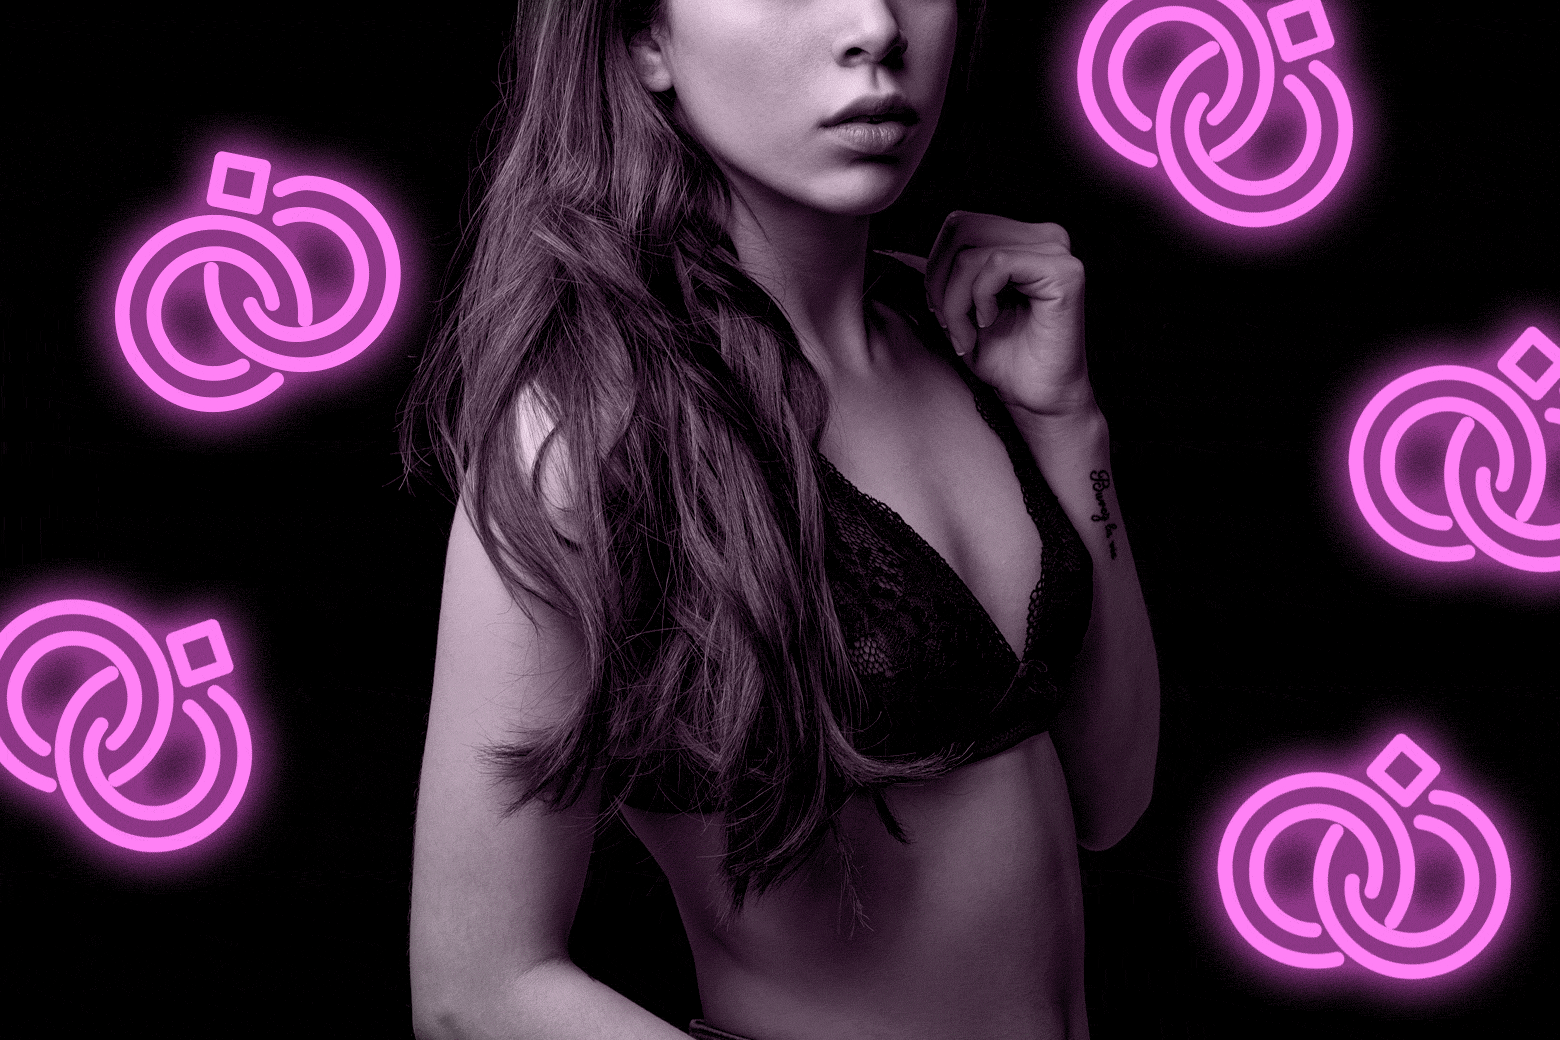 Photo illustration of a woman in a bra and neon wedding rings behind her. 